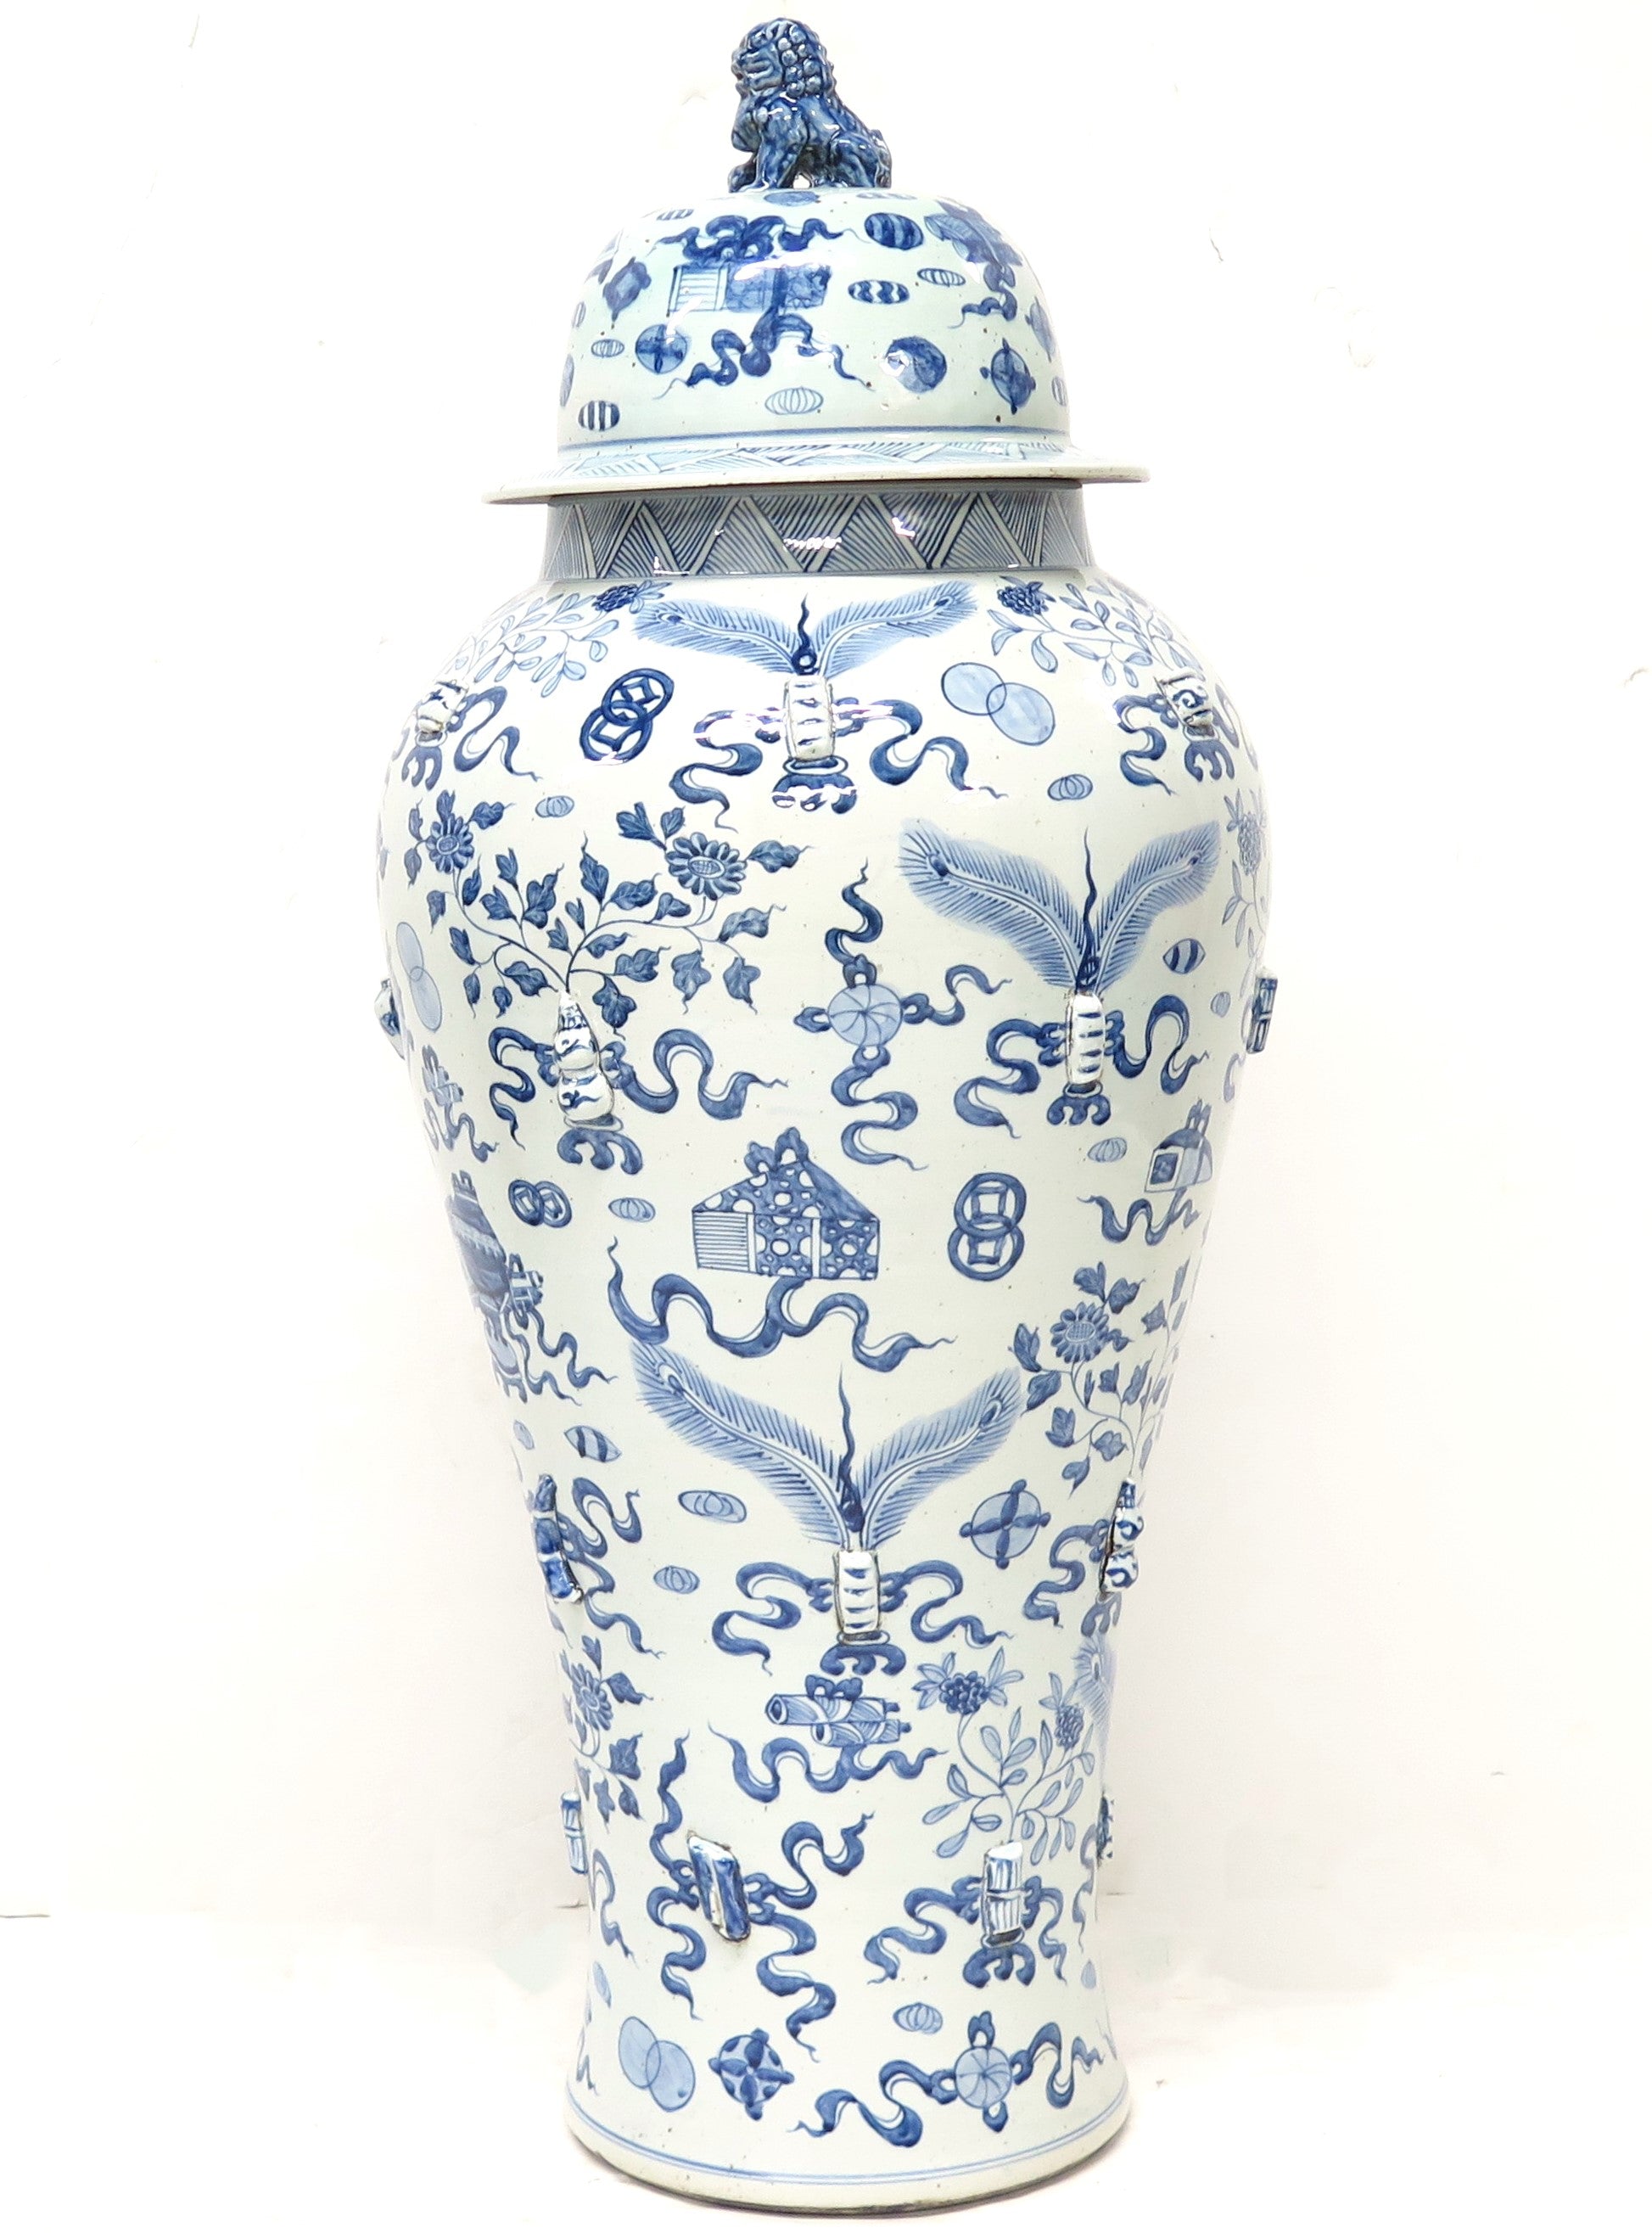 Chinese Blue and White Porcelain Tall Temple Jar with Cover